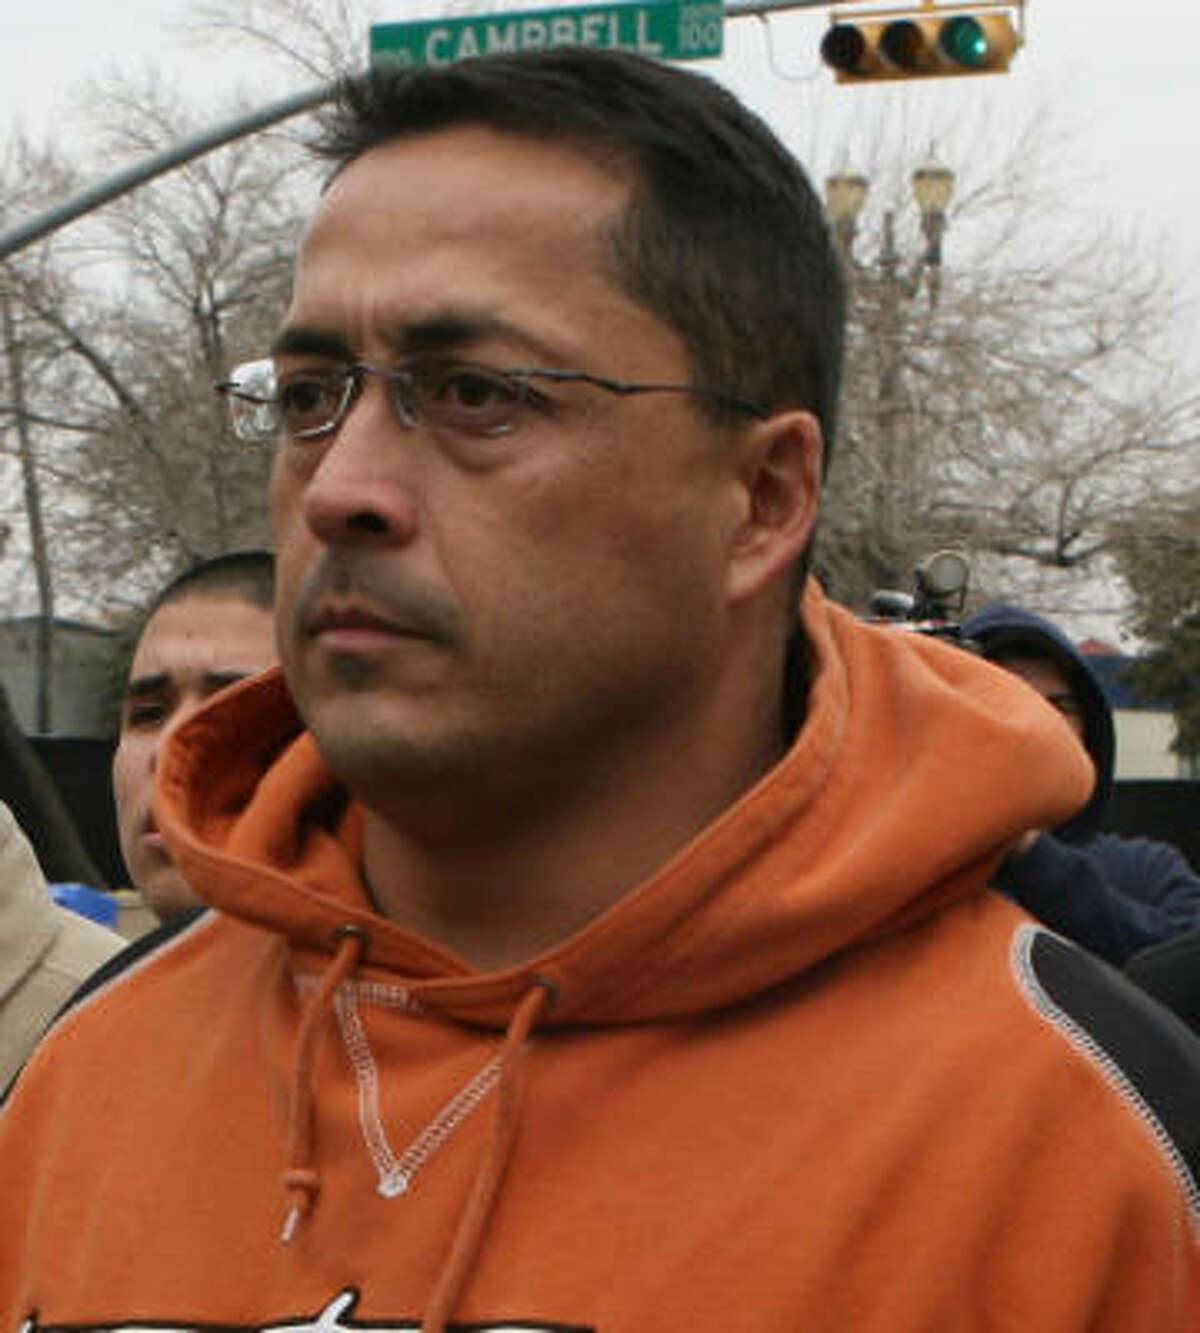 Former U.S. Border Patrol agent Ignacio Ramos was beaten by inmates last weekend at the Mississippi prison where he is incarcerated.